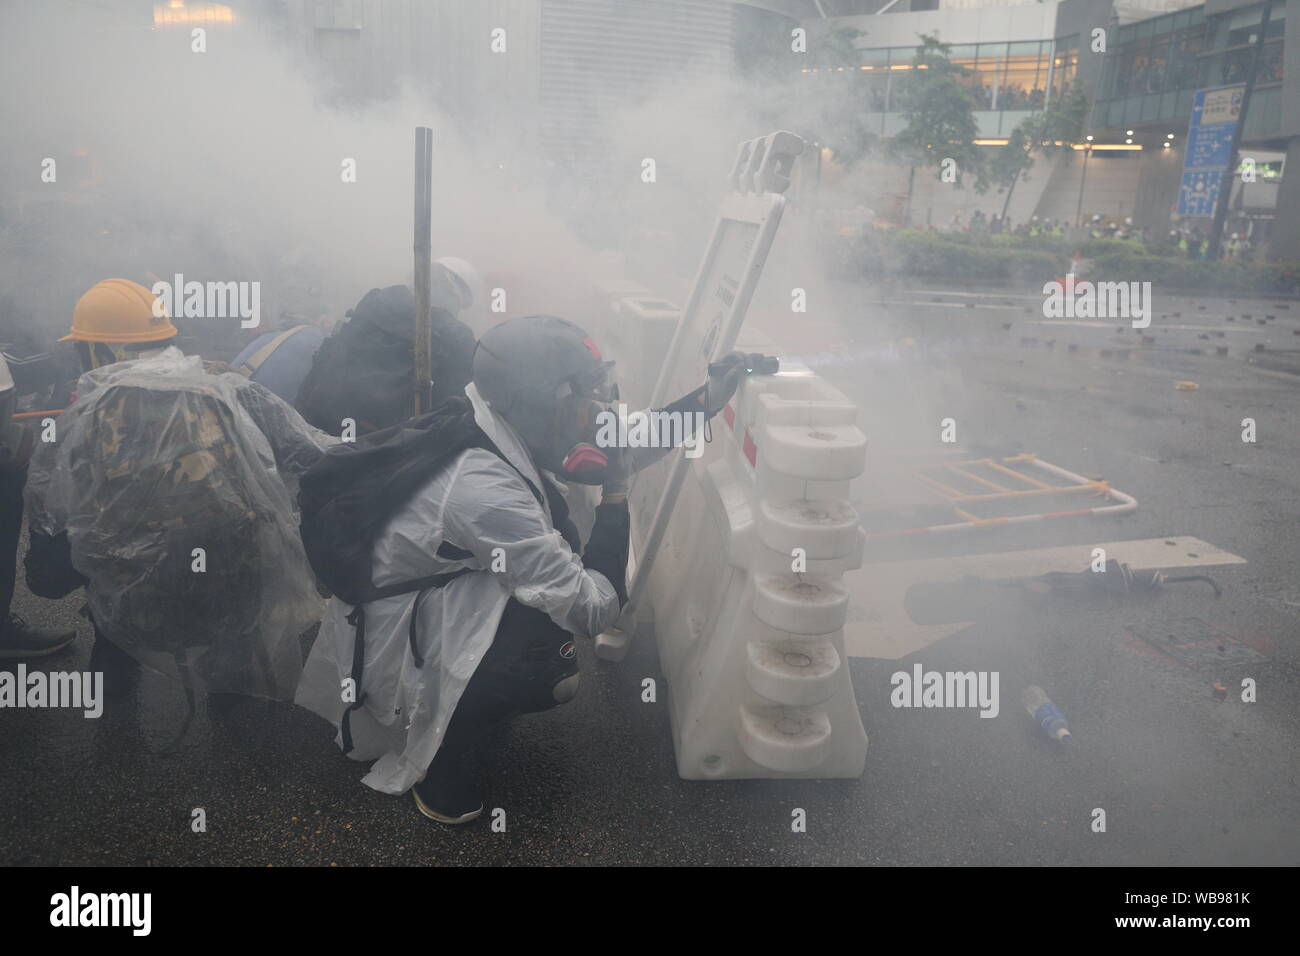 Hong Kong, China. 25th Aug, 2019. 25th August 2019. Hong Kong Anti Extradition Bill protest march in Tsuen Wan and Kwai Tsing. After a peaceful march major clashes took place, with protesters 5th throwing bricks, bottles and molotovs at police lines who were firing constant tear gas, rubber bullets and pepper balls. Police also fired live rounds at one point. Protesters dispersed once police mobilized 2 water cannon vehicles. Credit: David Coulson/Alamy Live News Stock Photo